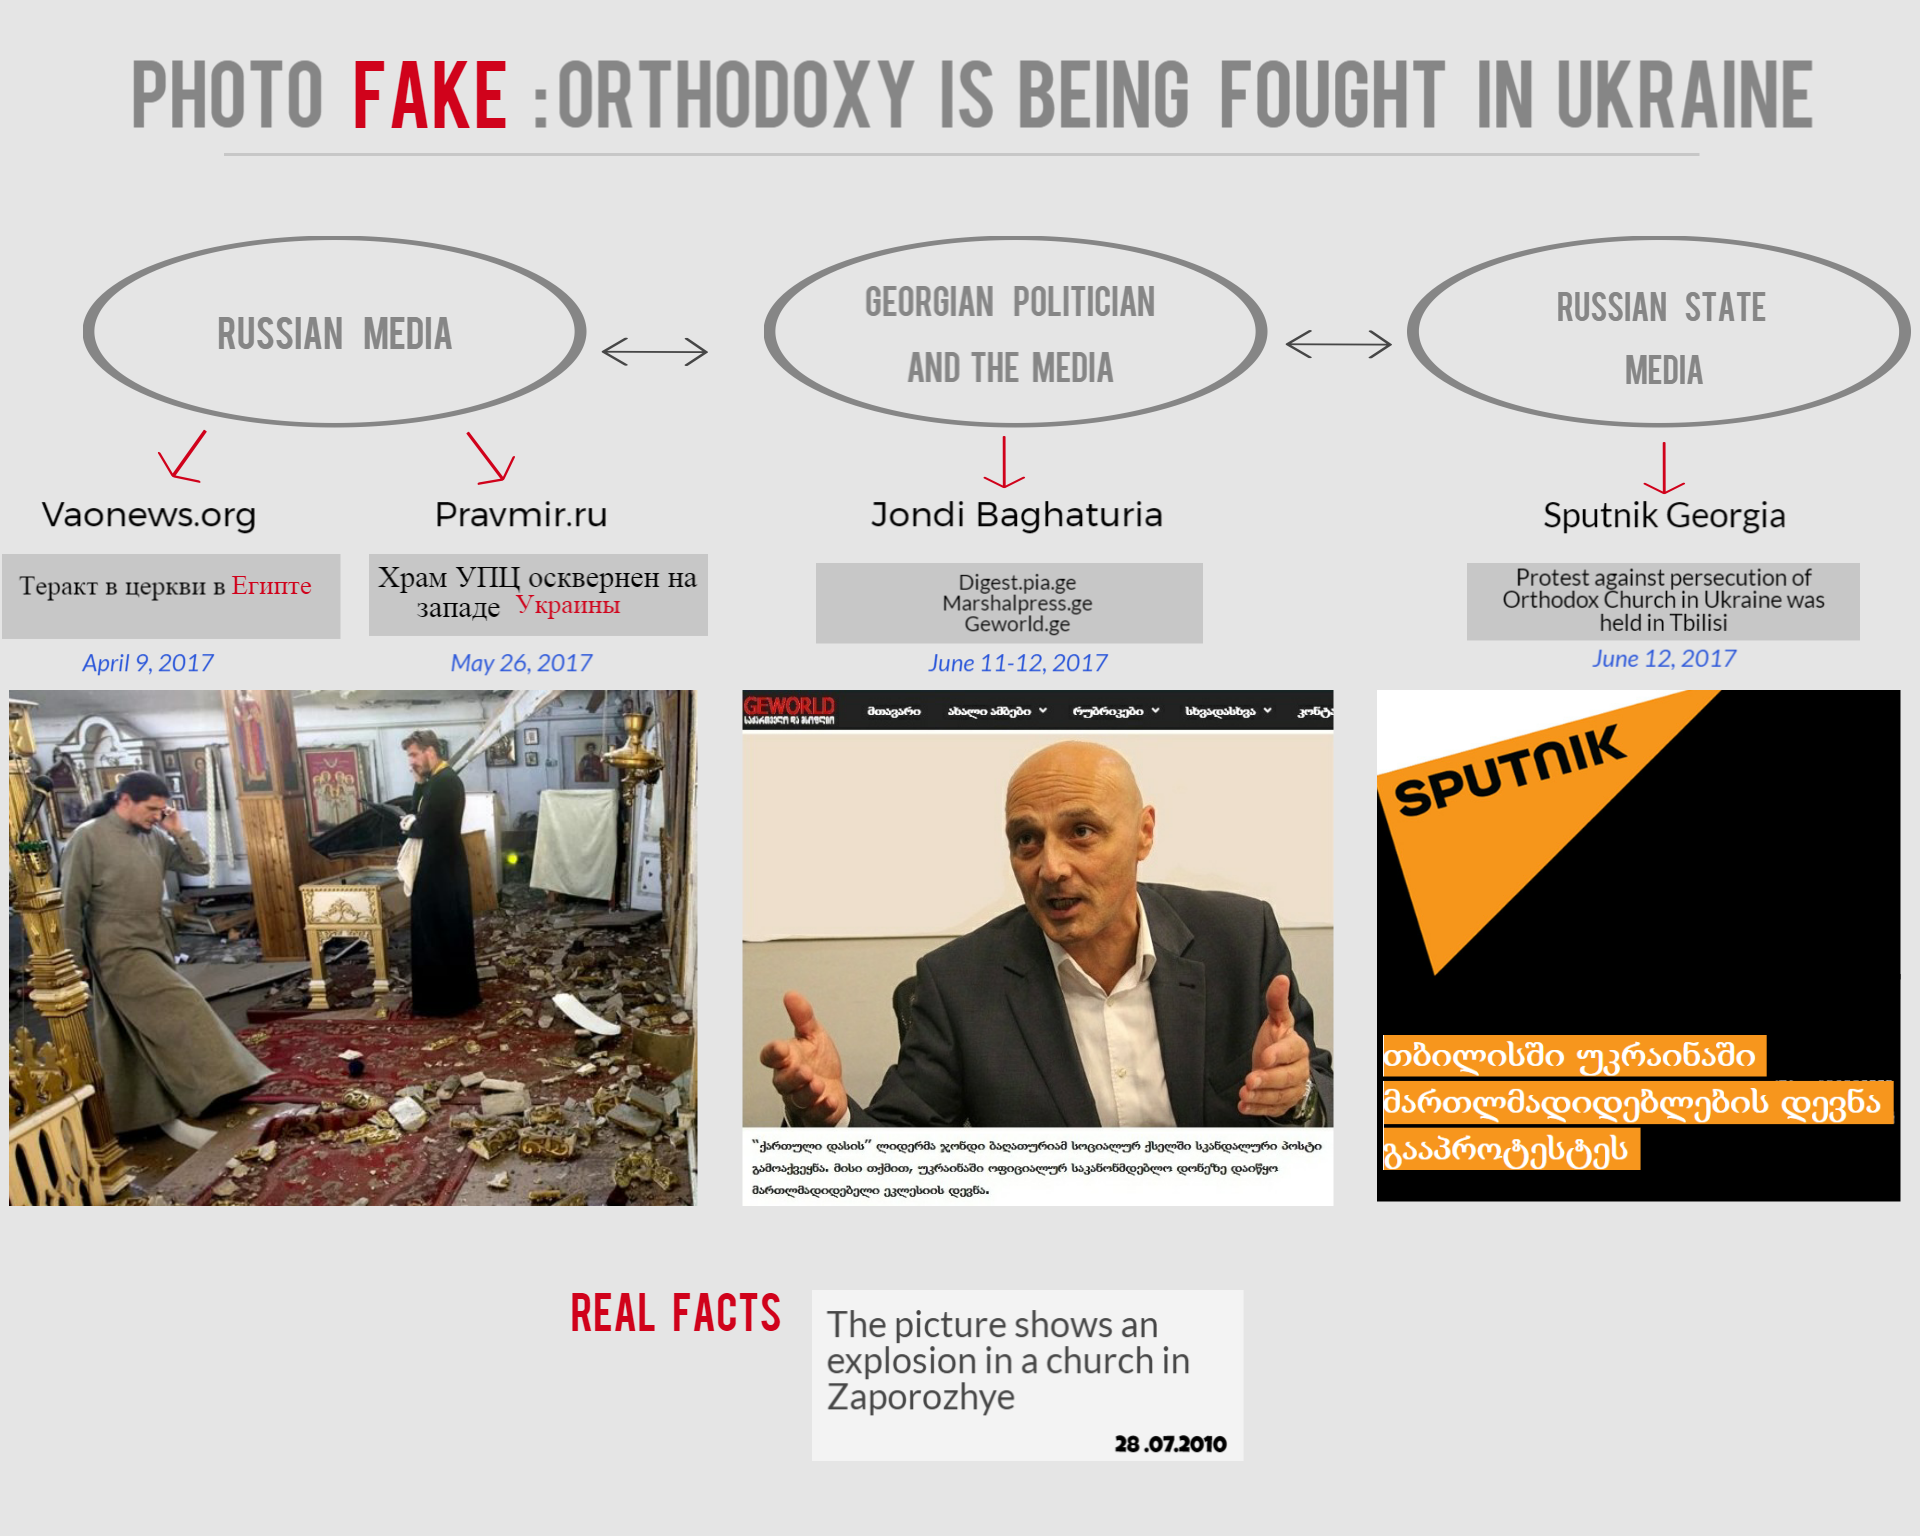 inline images photo fake orth 23133167 499a578bf78e6f336c4c2d905c0020122e9bb584 Baghaturia shares disinformative photos about alleged raids in Ukrainian Orthodox churches